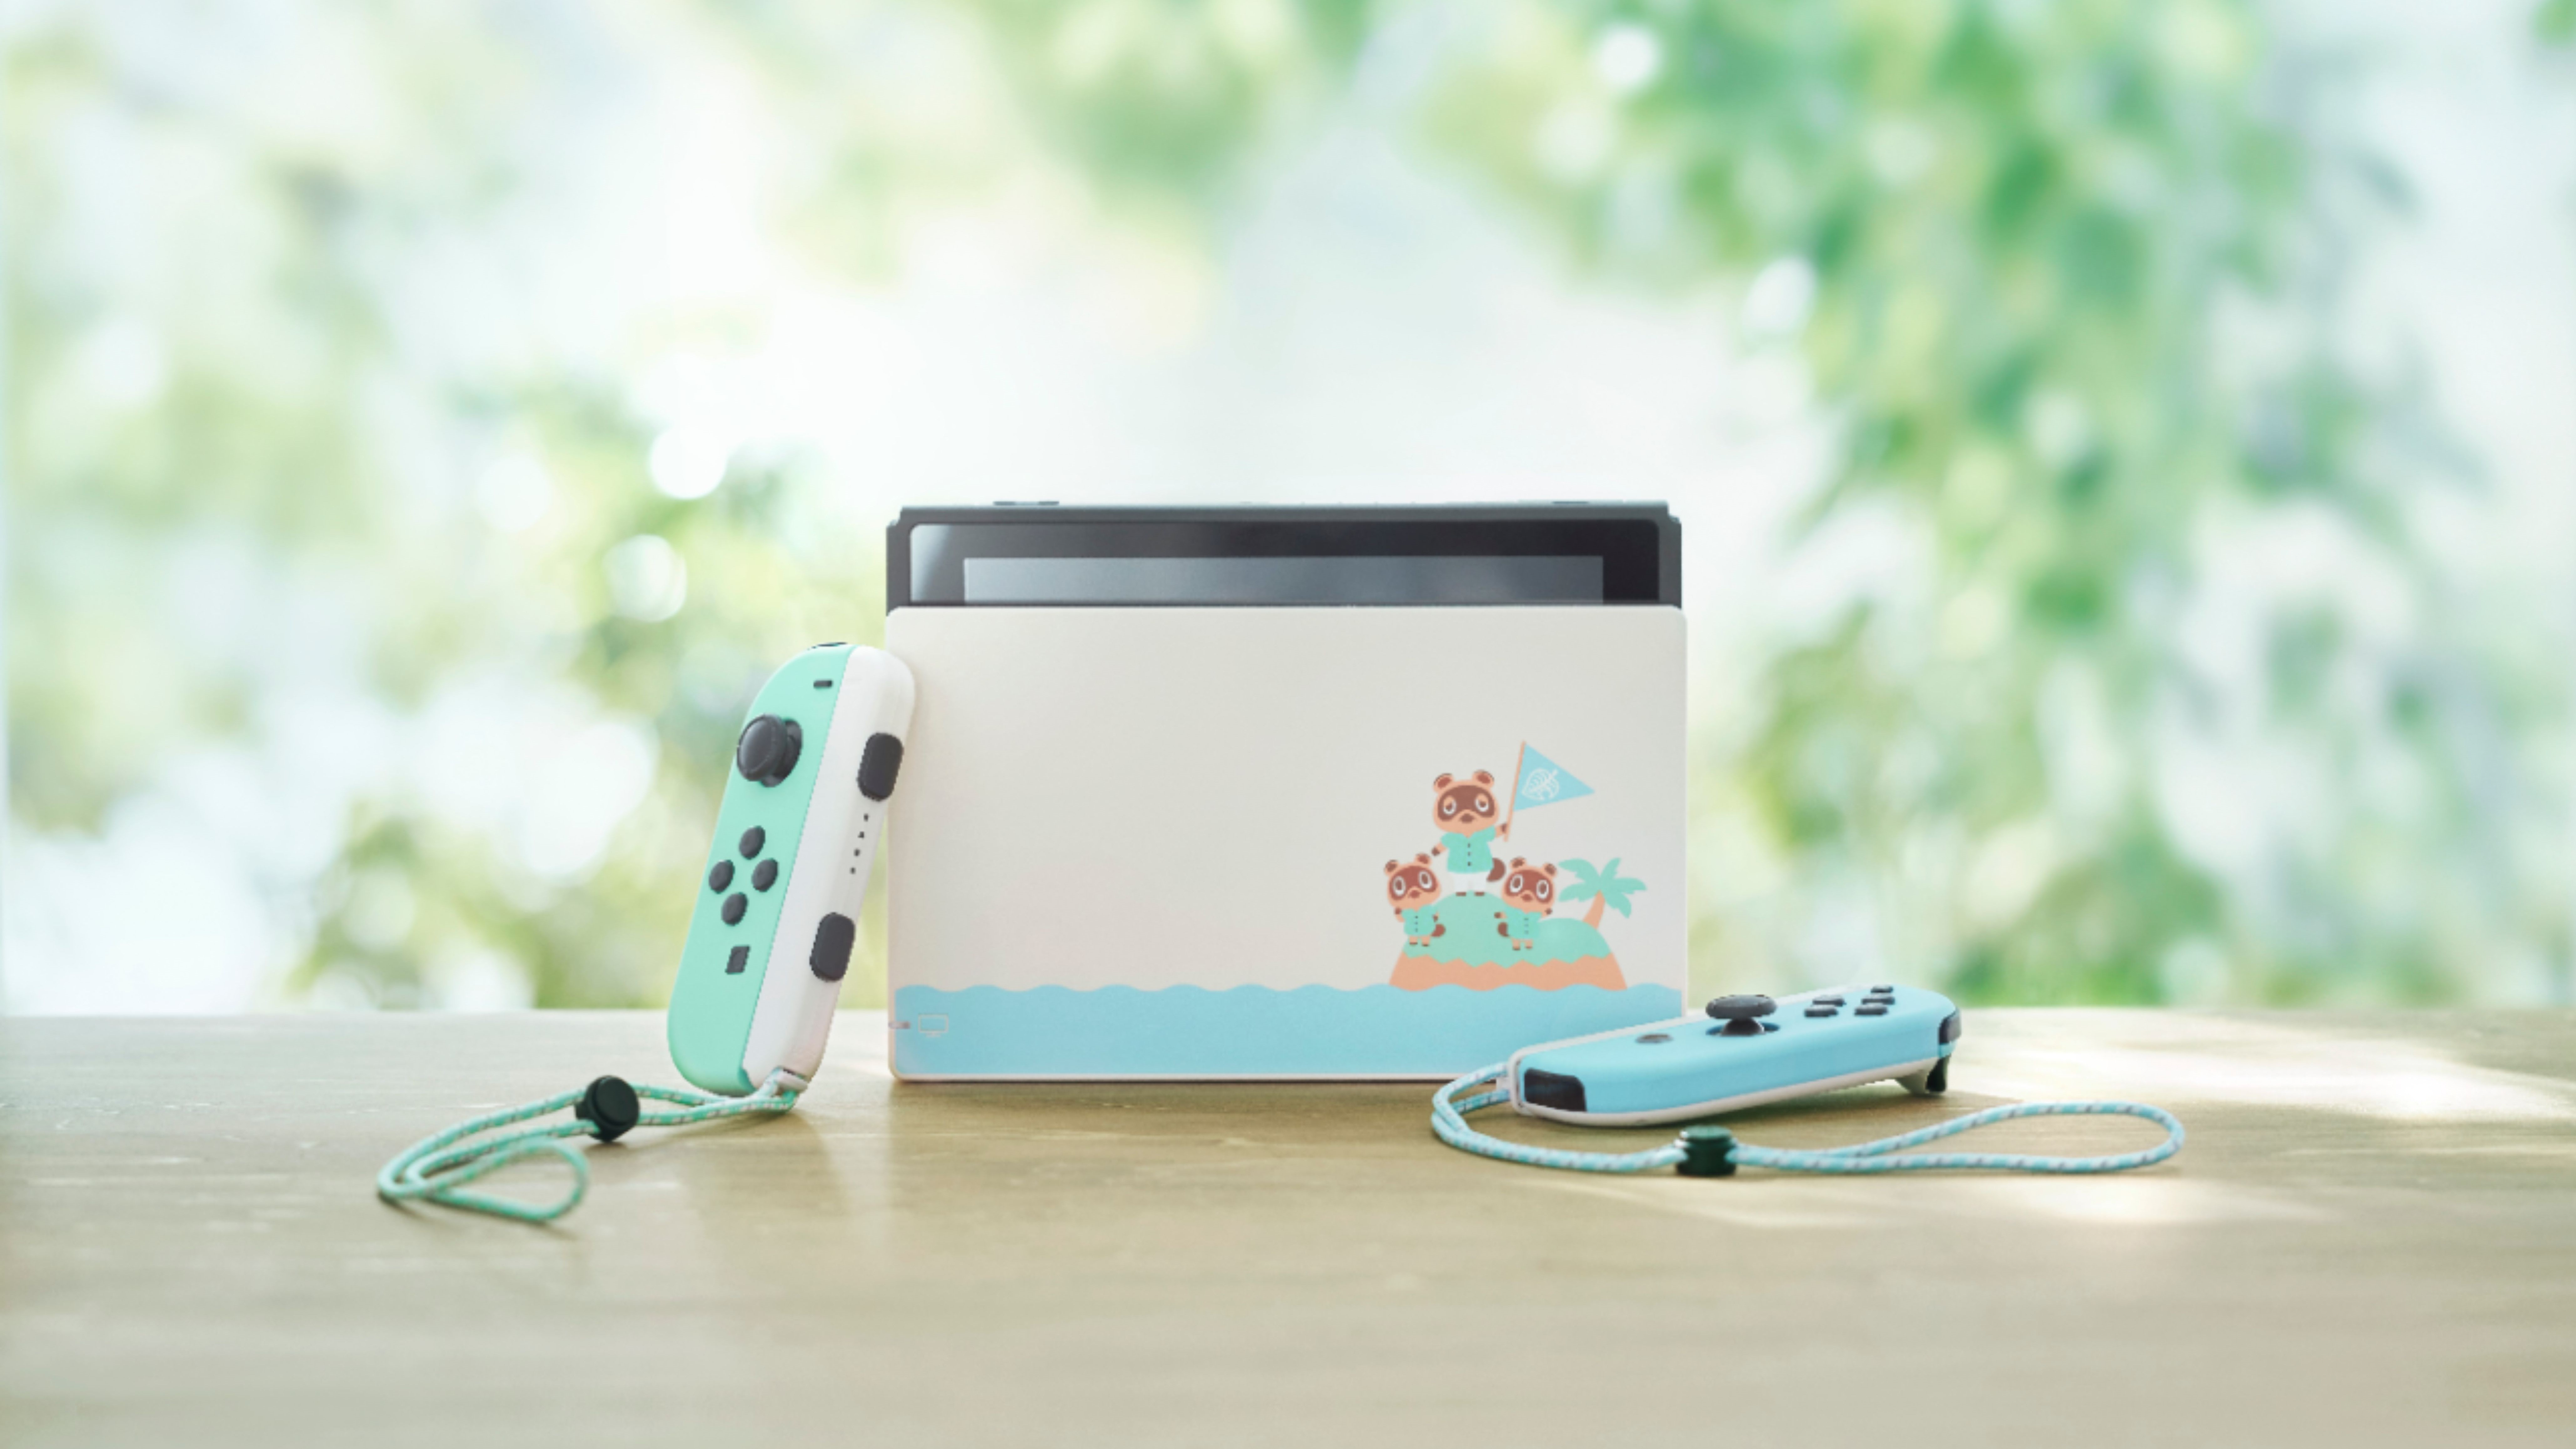 animal crossing new horizons switch on wooden table in front of blurry trees